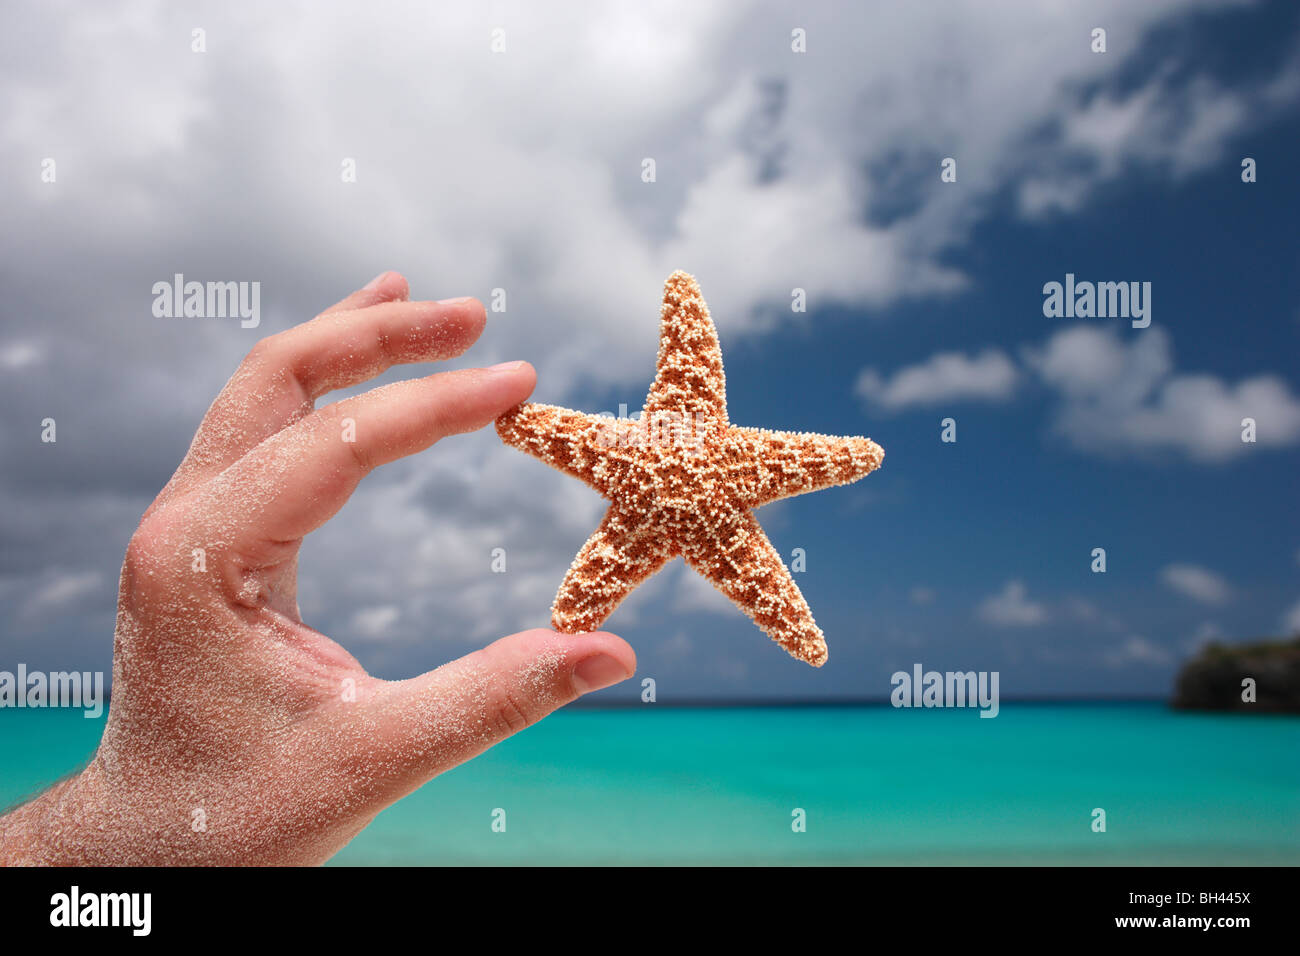 A man's hand holding a small starfish in the air on a tropical beach Stock Photo